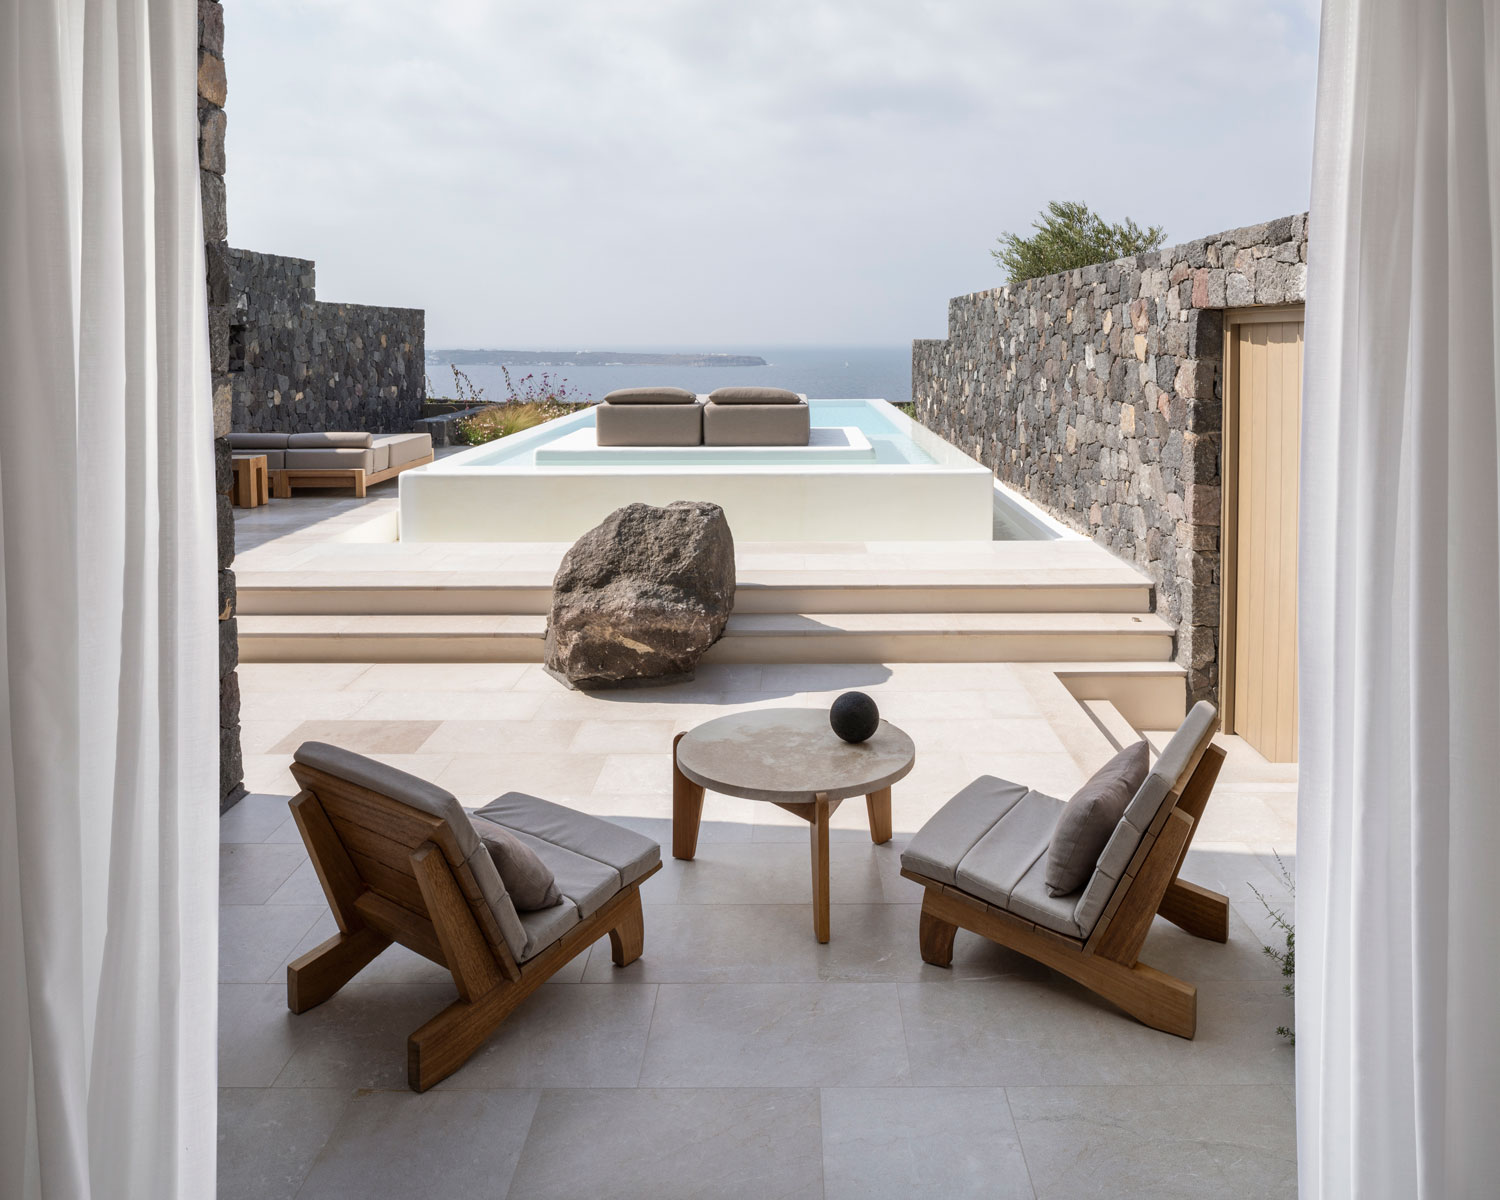 Oia Epitome Hotel Offers Infinite Views To Cycladic Landscape -WWW.AUTHENTICINTERIOR.COM design studio & blog Photography Stale Eriksen